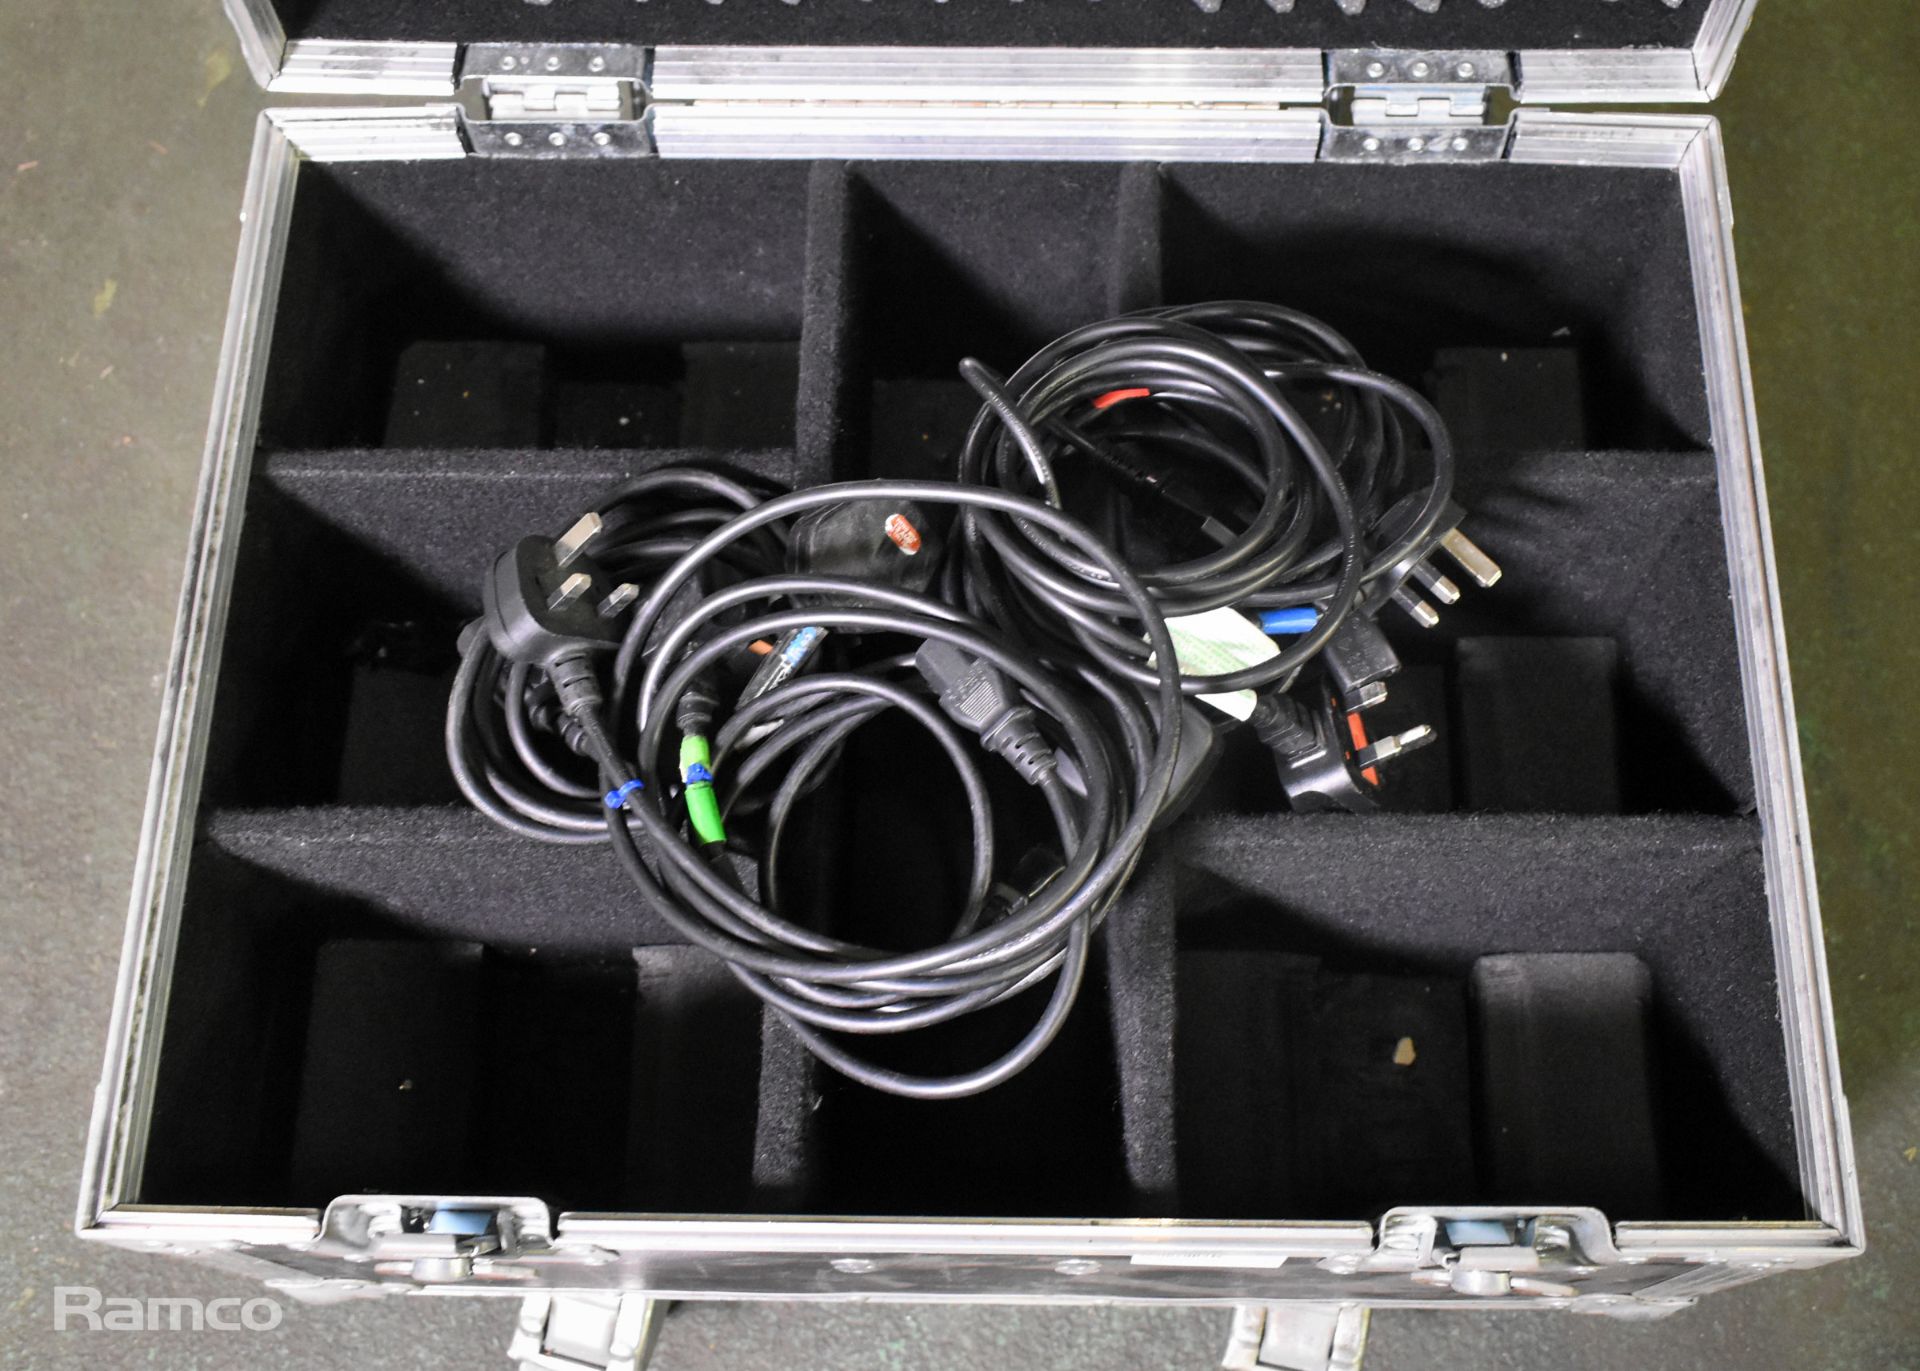 6x Chauvet LED SlimPar Tri7 IRC in flight case with power cables - Image 5 of 11